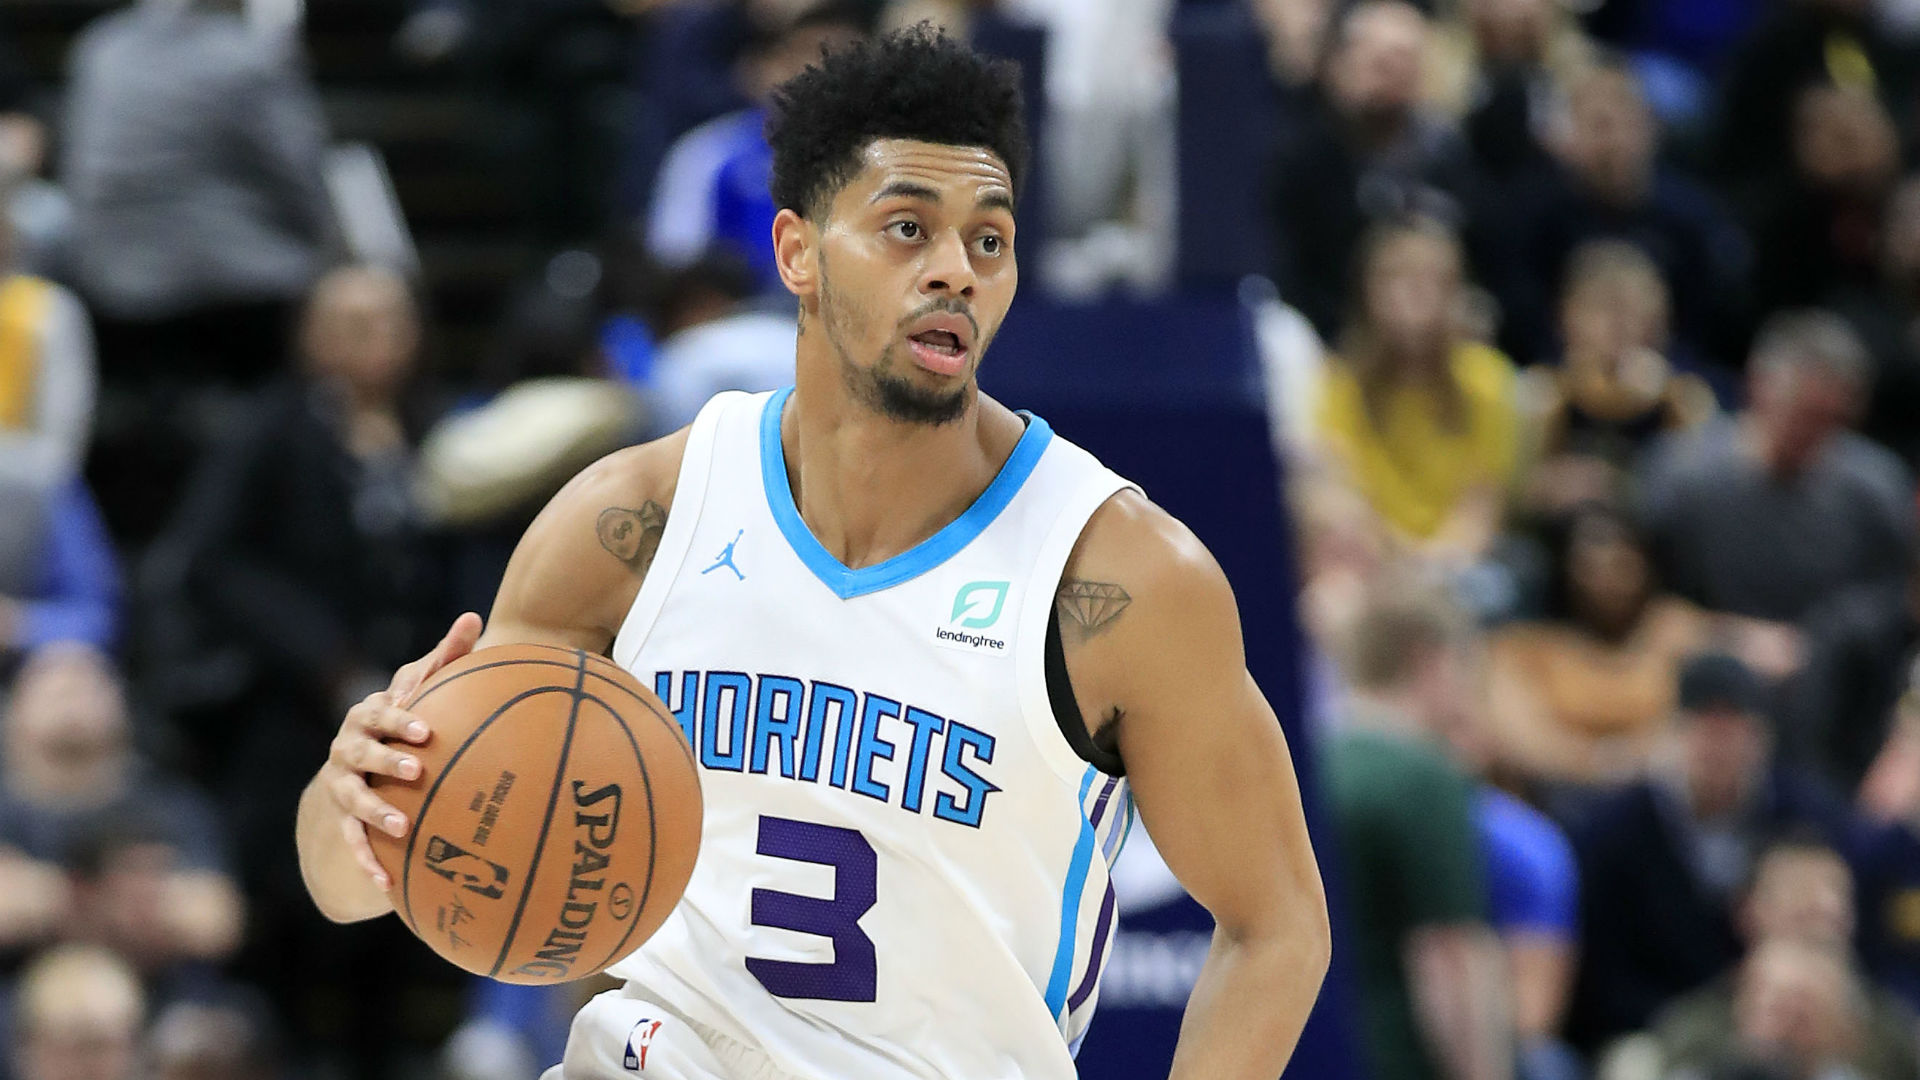 After sinking a buzzer-beater from beyond half-court to beat the Toronto Raptors, Charlotte Hornets swingman Jeremy Lamb was left astounded.